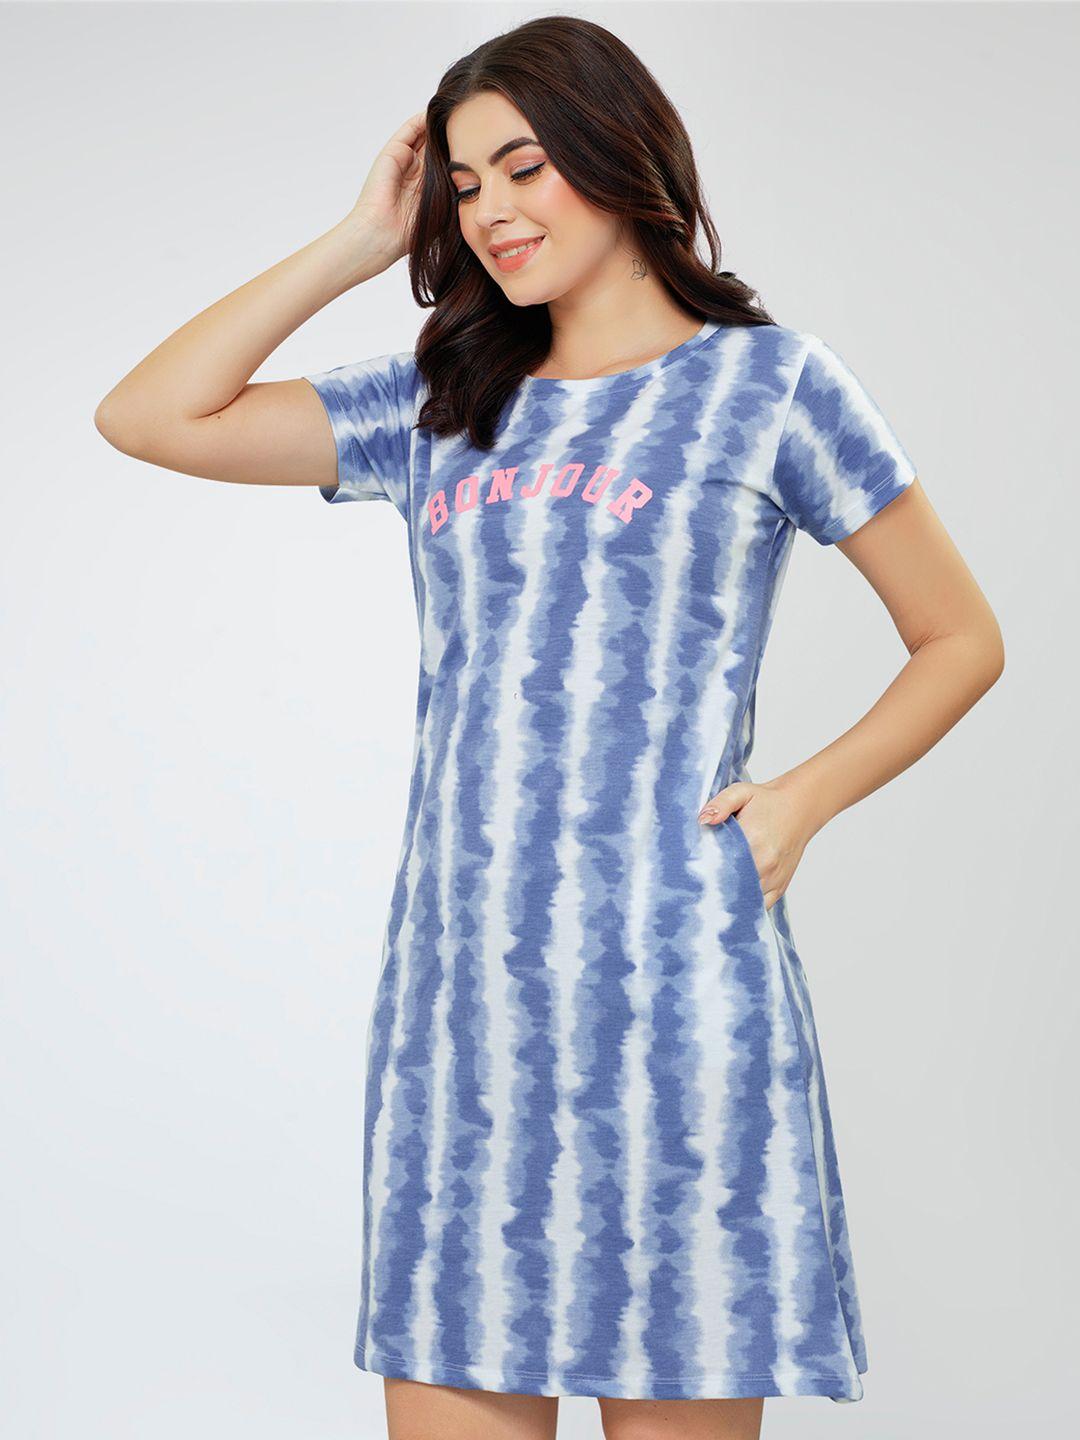 beebelle tie and dye t-shirt nightdress